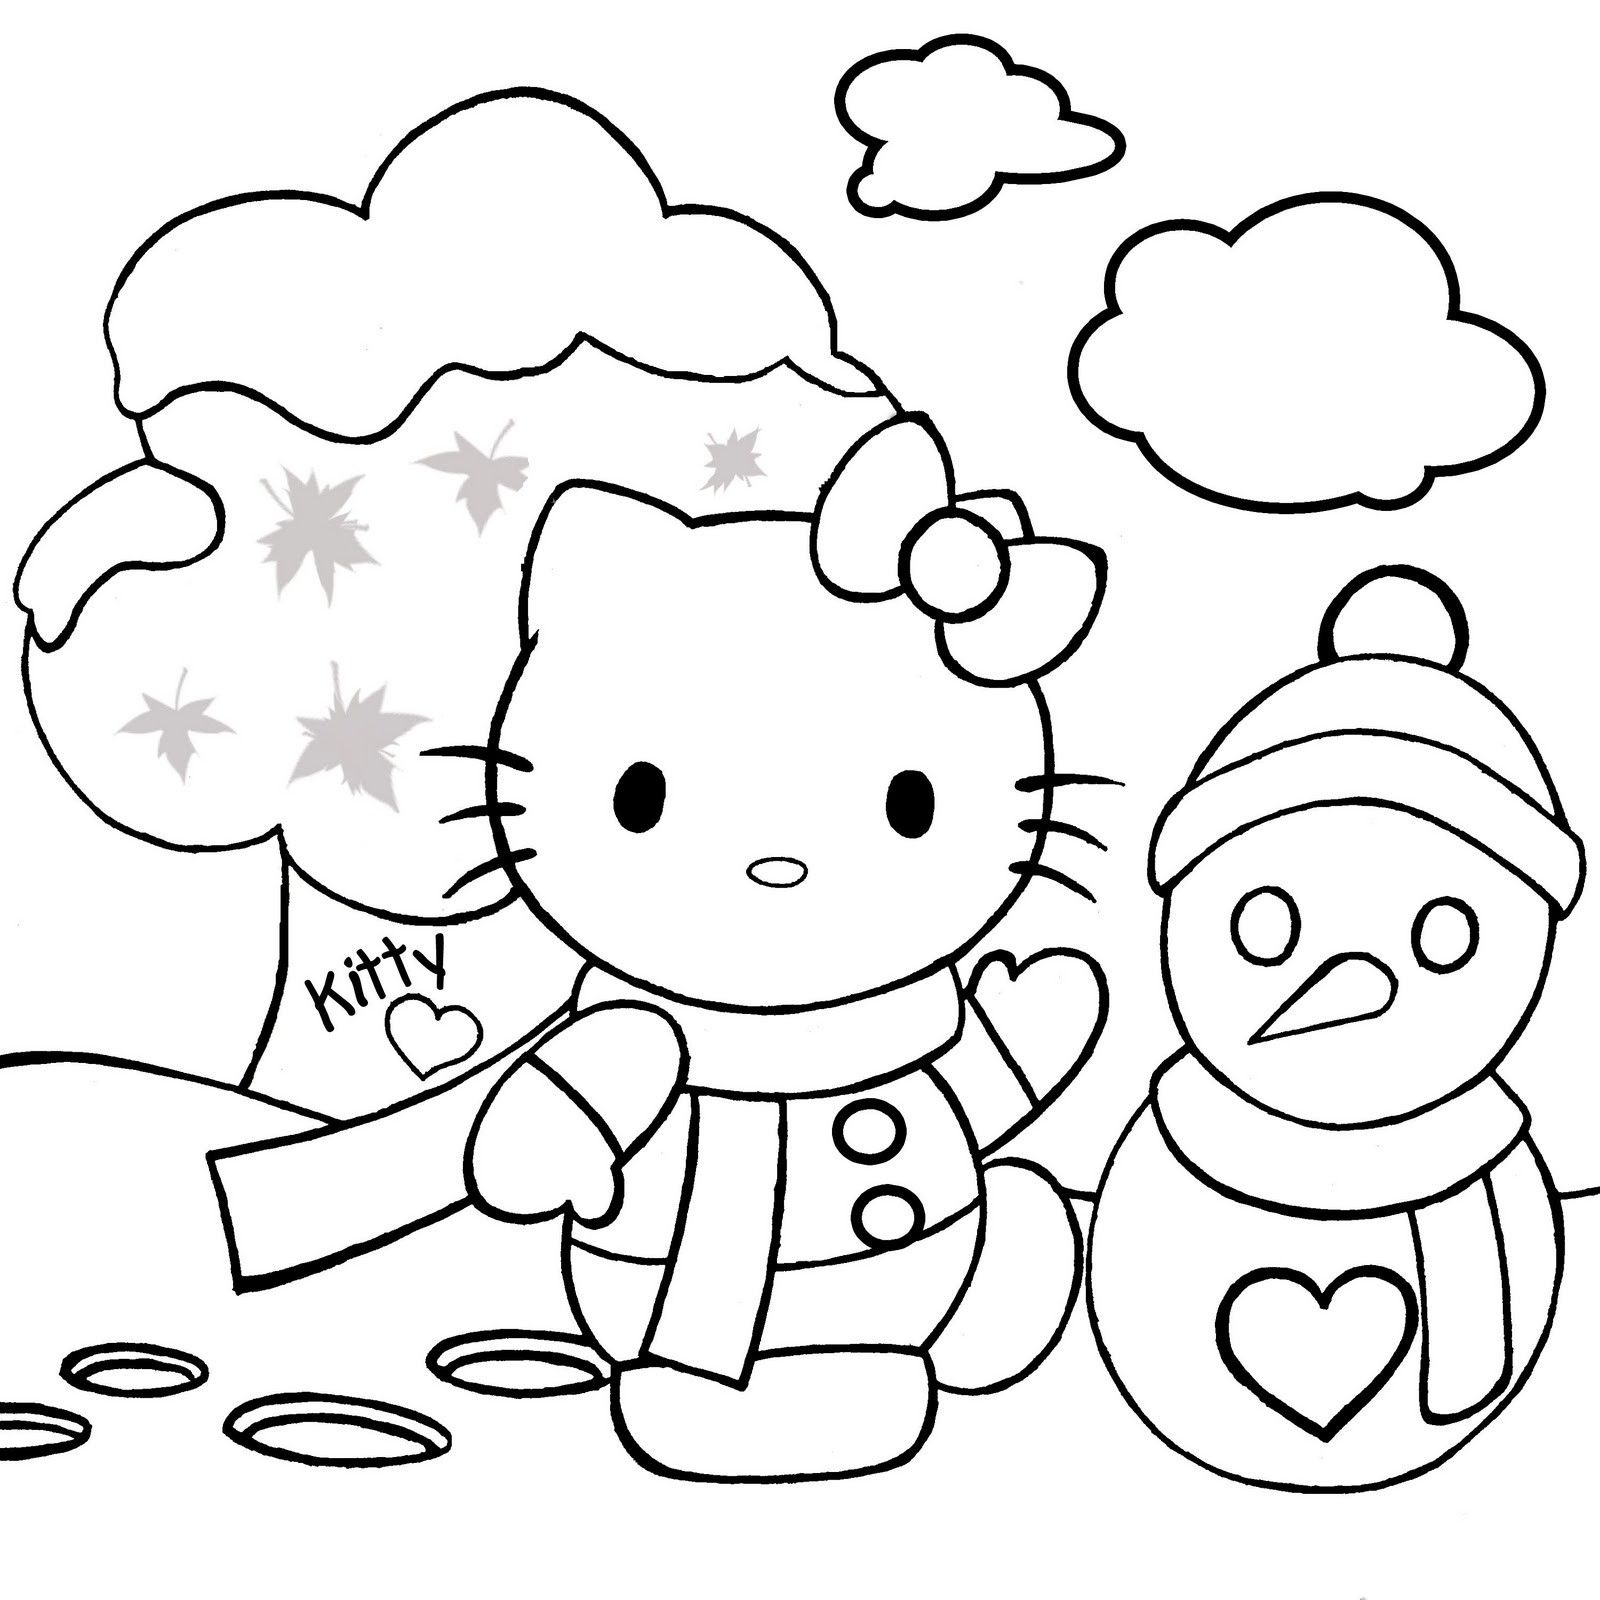 Children Christmas Coloring Pages
 Hello Kitty Christmas Coloring Pages 1